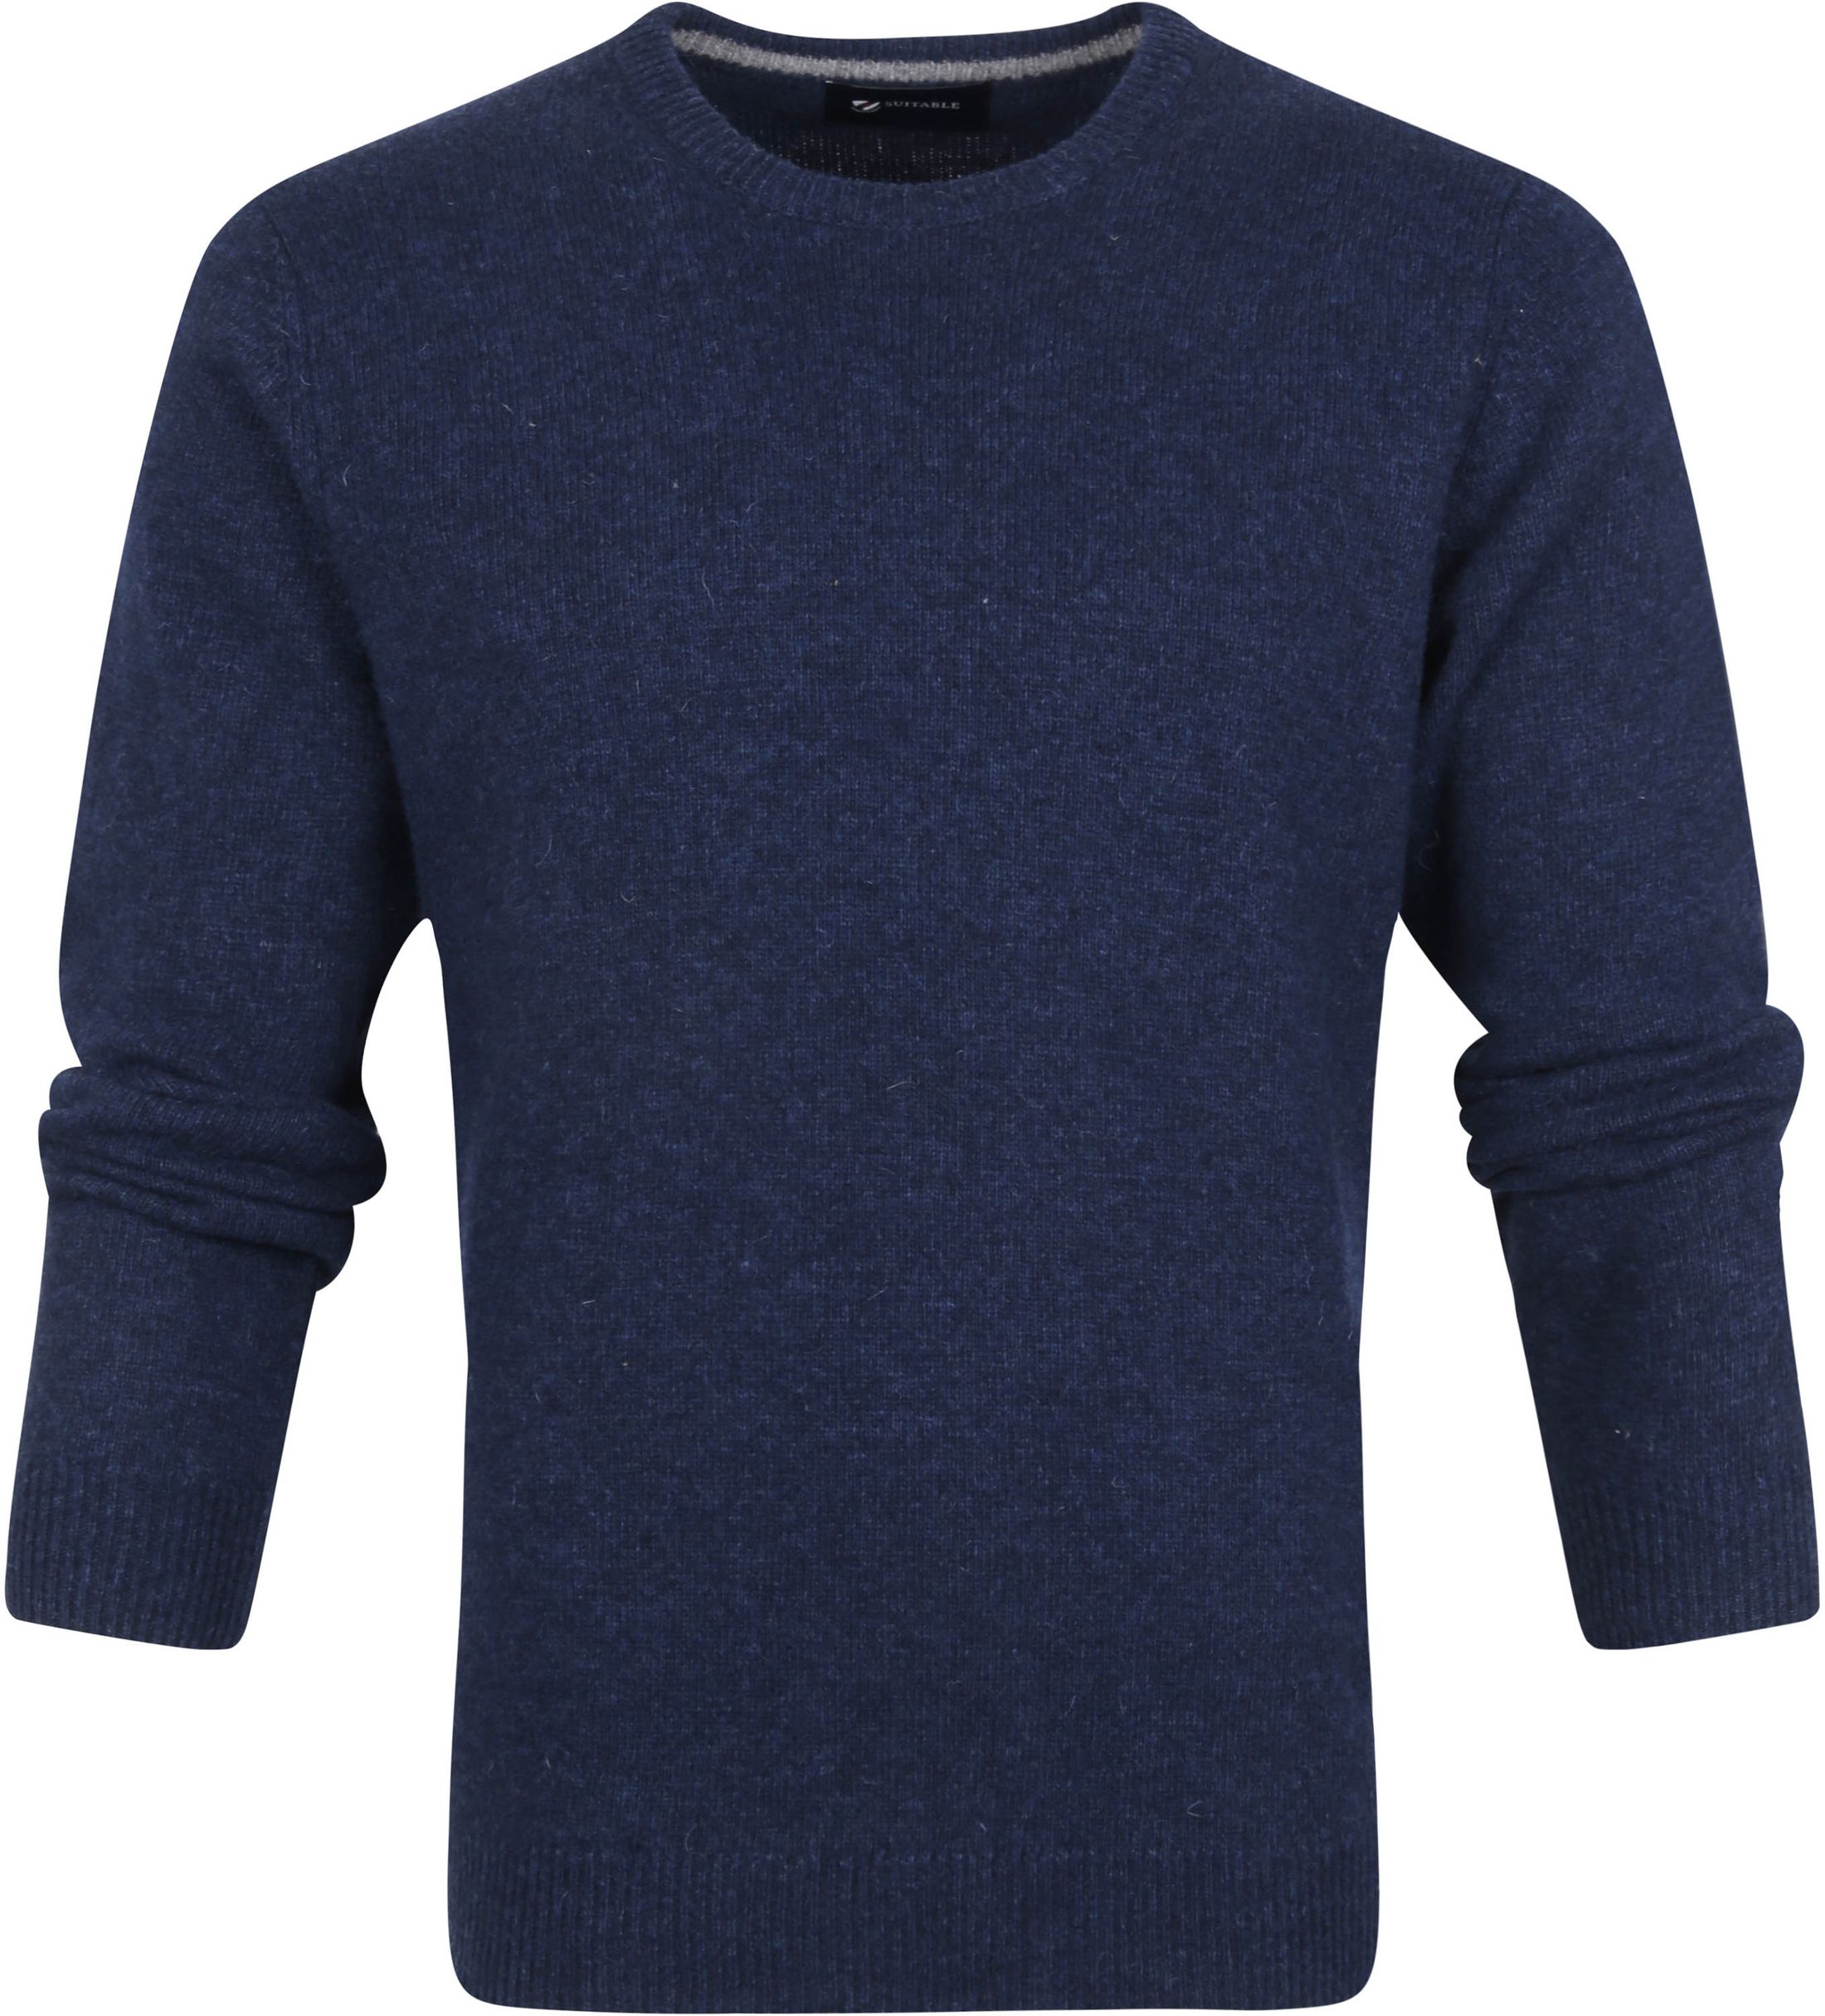 Suitable Lambswool Pullover O-Neck Navy Dark Blue Blue size 3XL